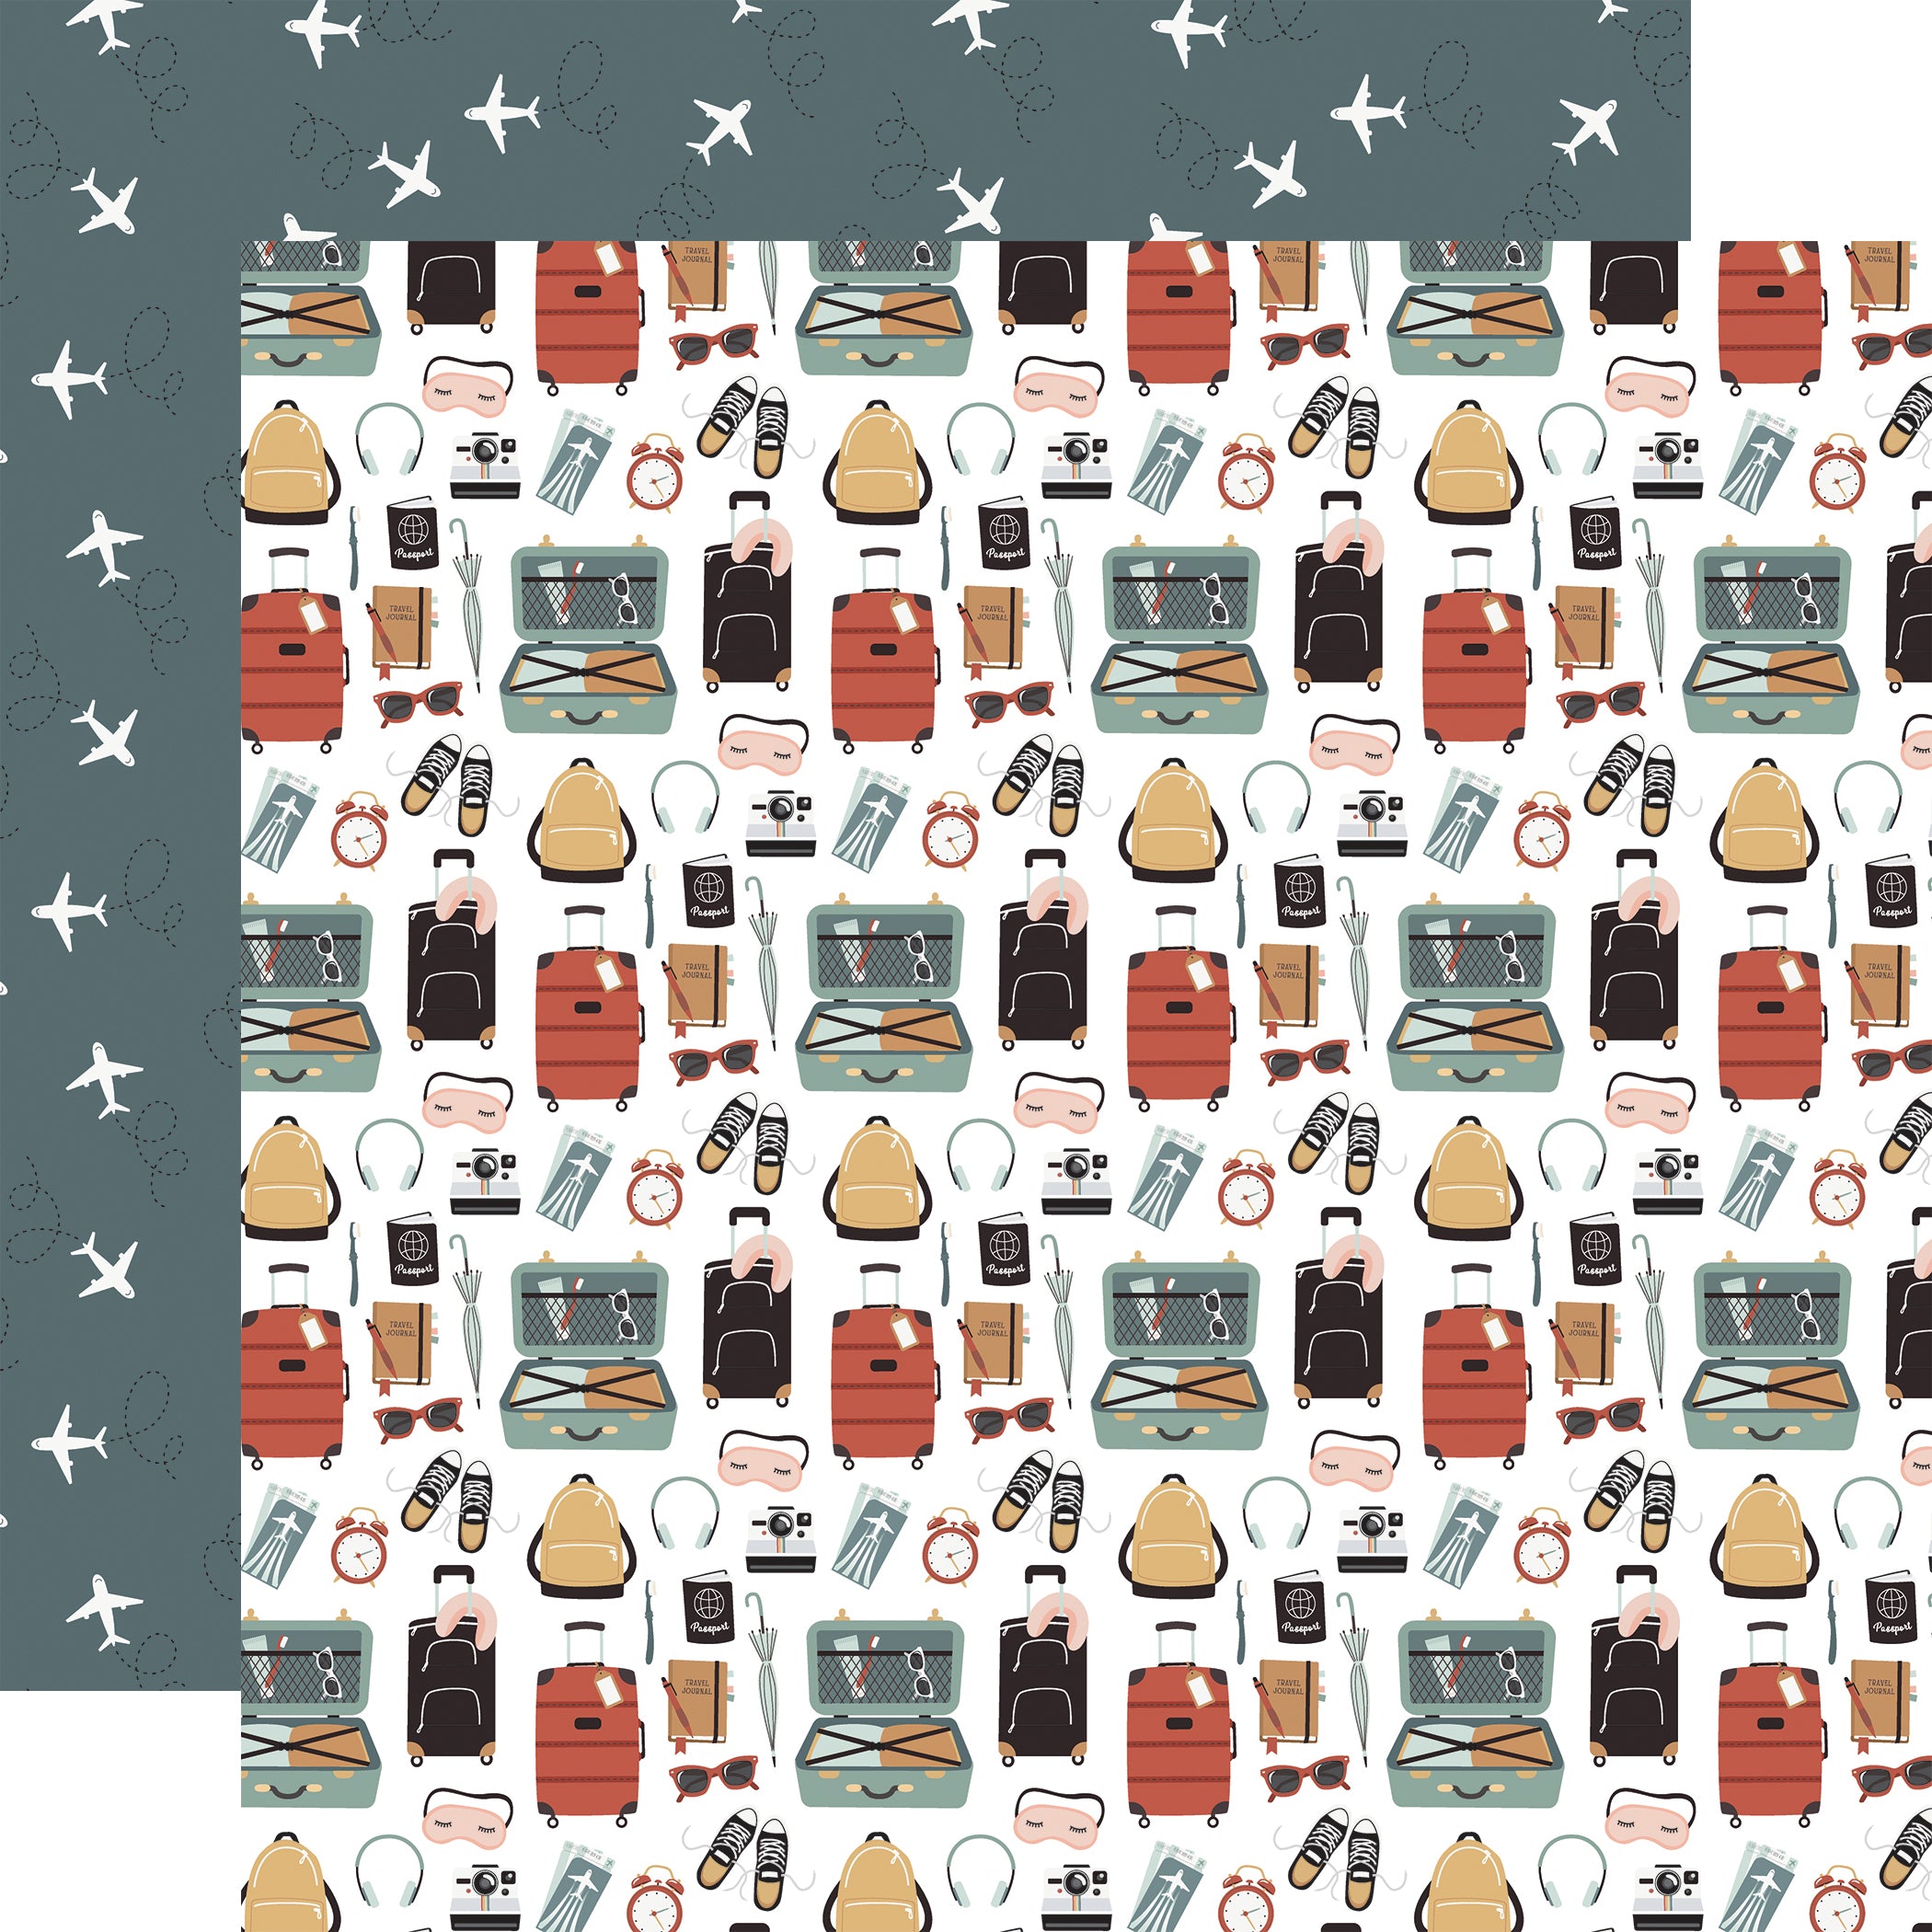 Let's Take the Trip Collection Pack Your Bags 12 x 12 Double-Sided Scrapbook Paper by Echo Park Paper